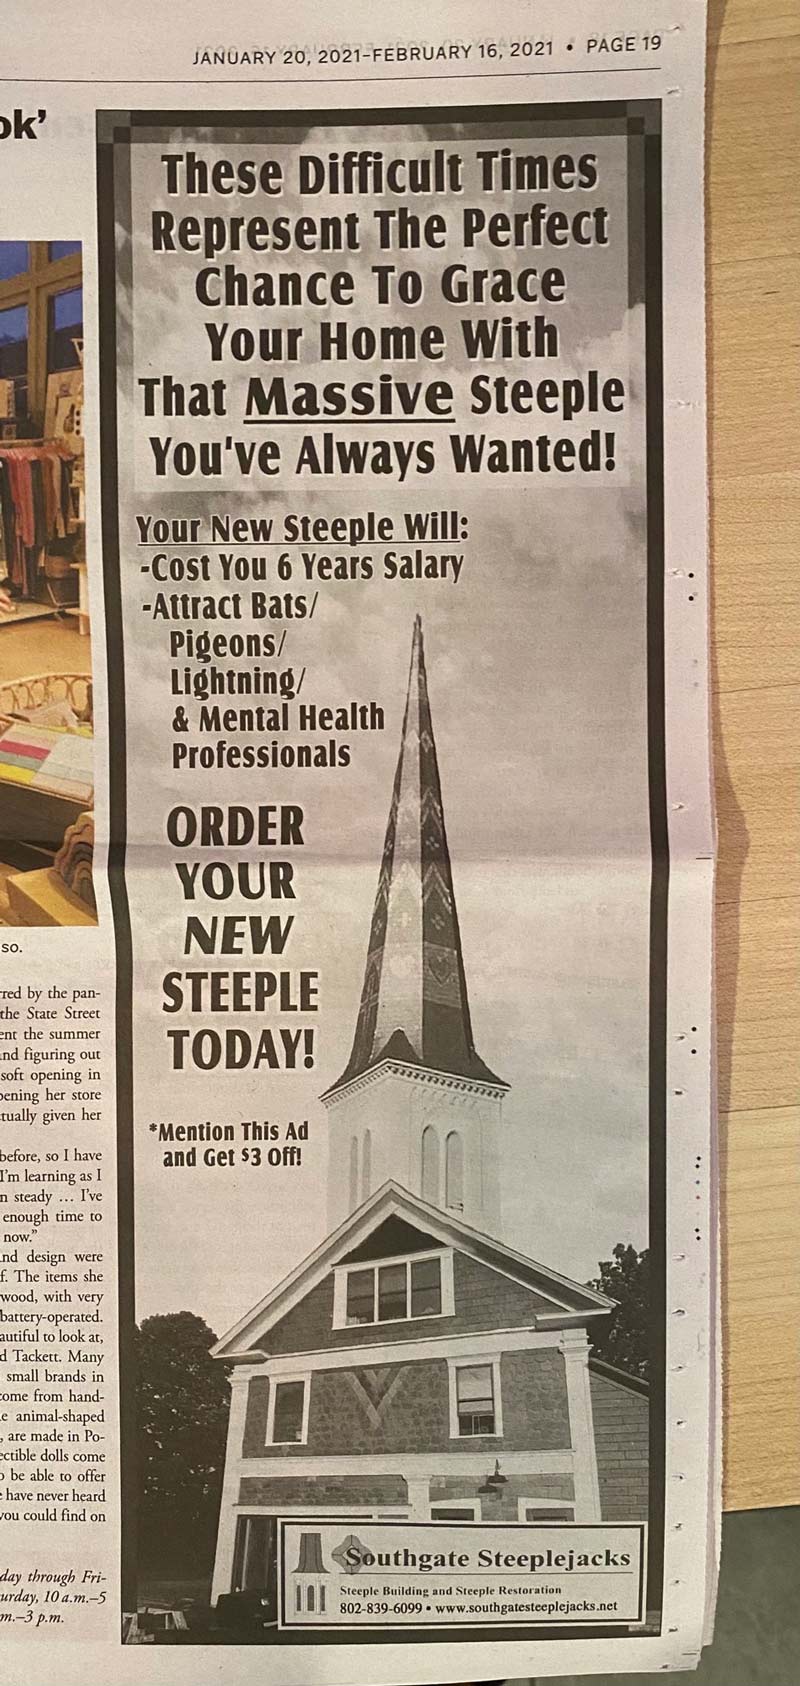 This ad for a steeple builder in my local paper